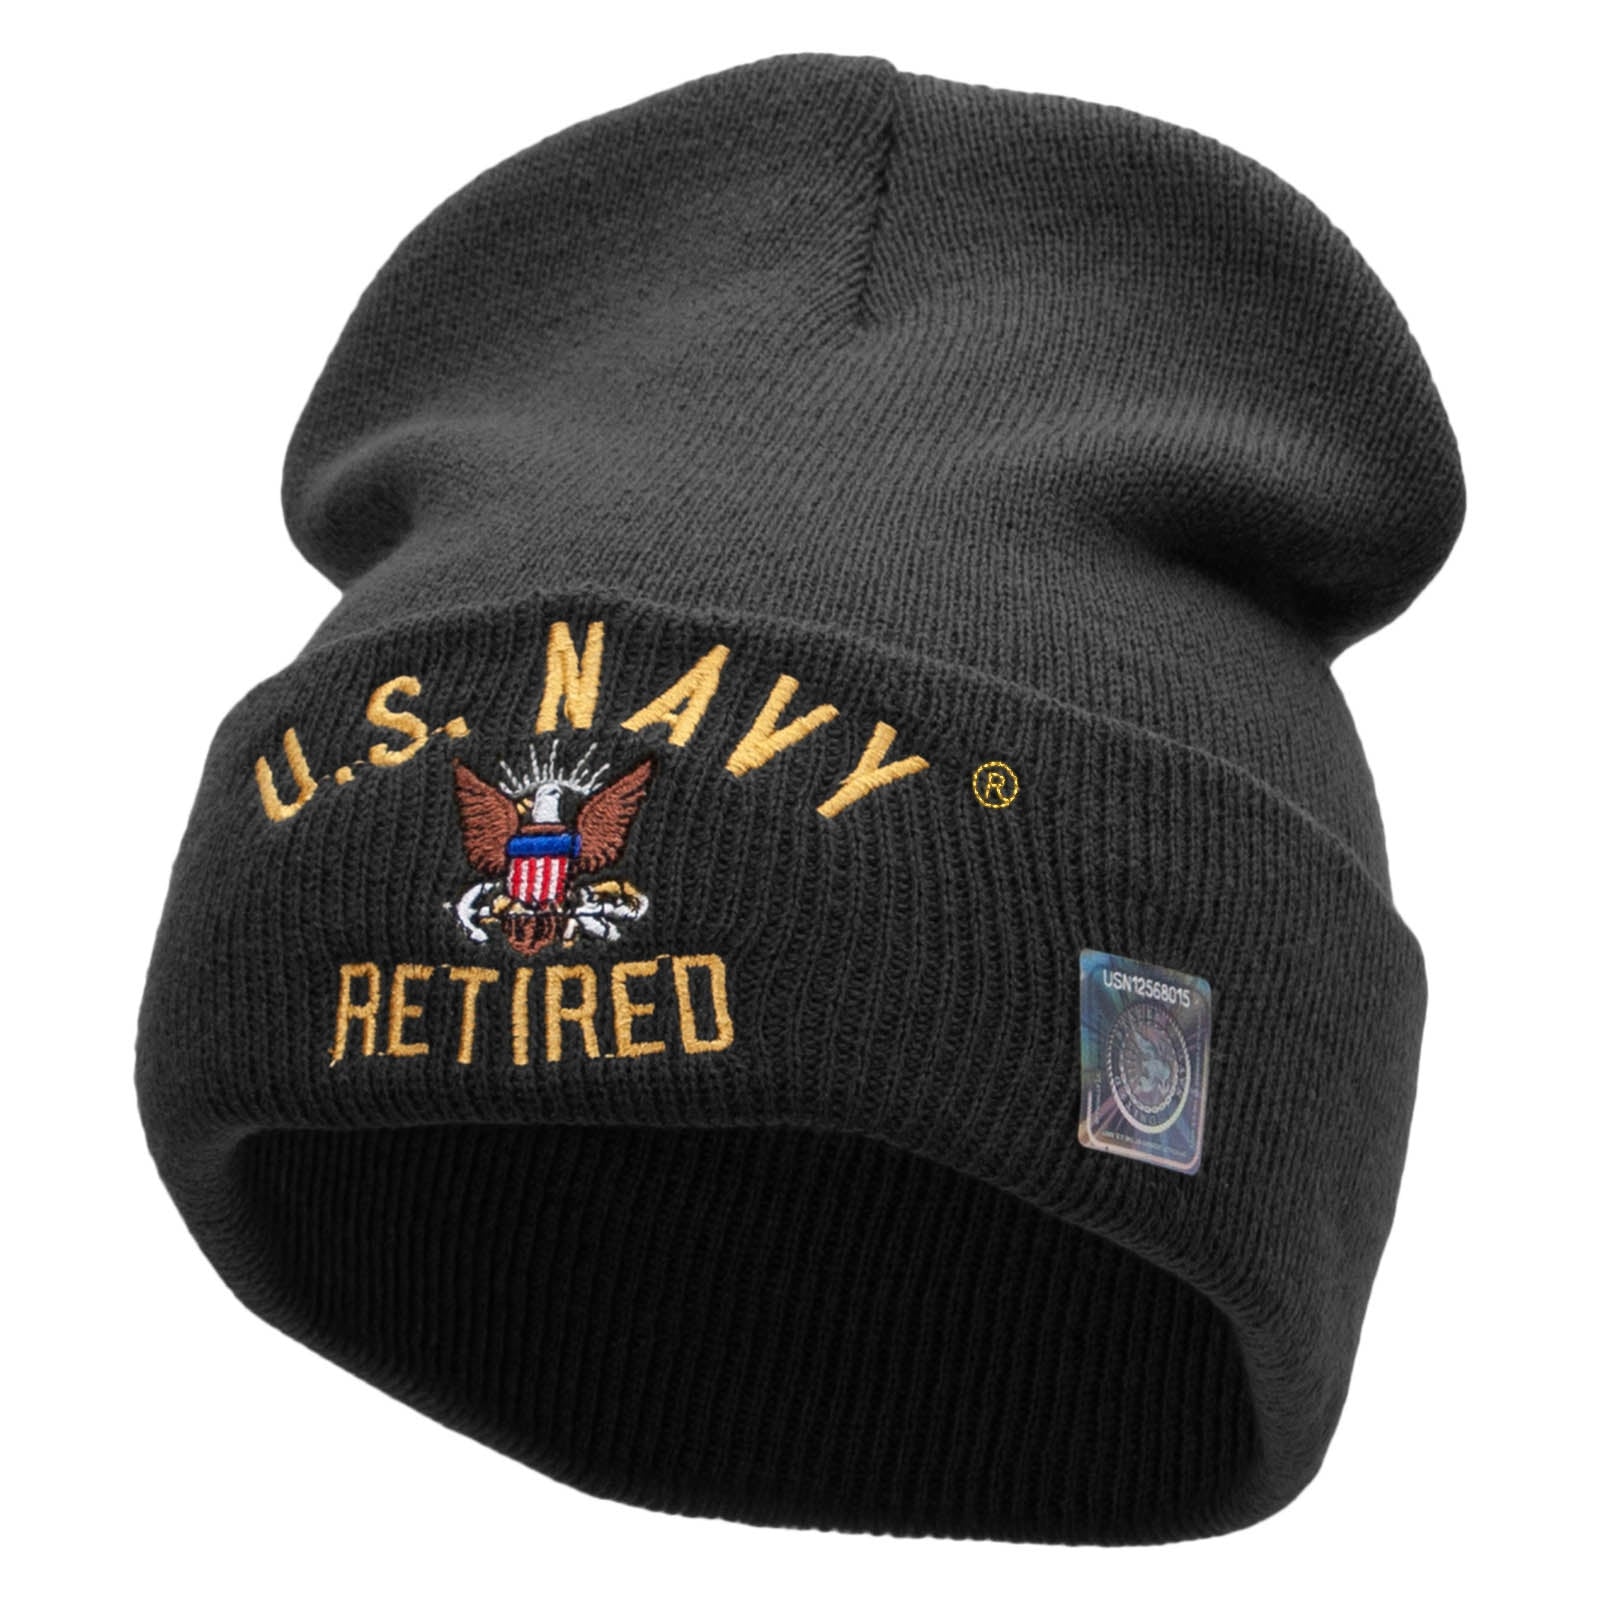 Licensed US Navy Beanie | – Long Military Designed USA Made Embroidered in Retired | Veterans/Retired e4Hats